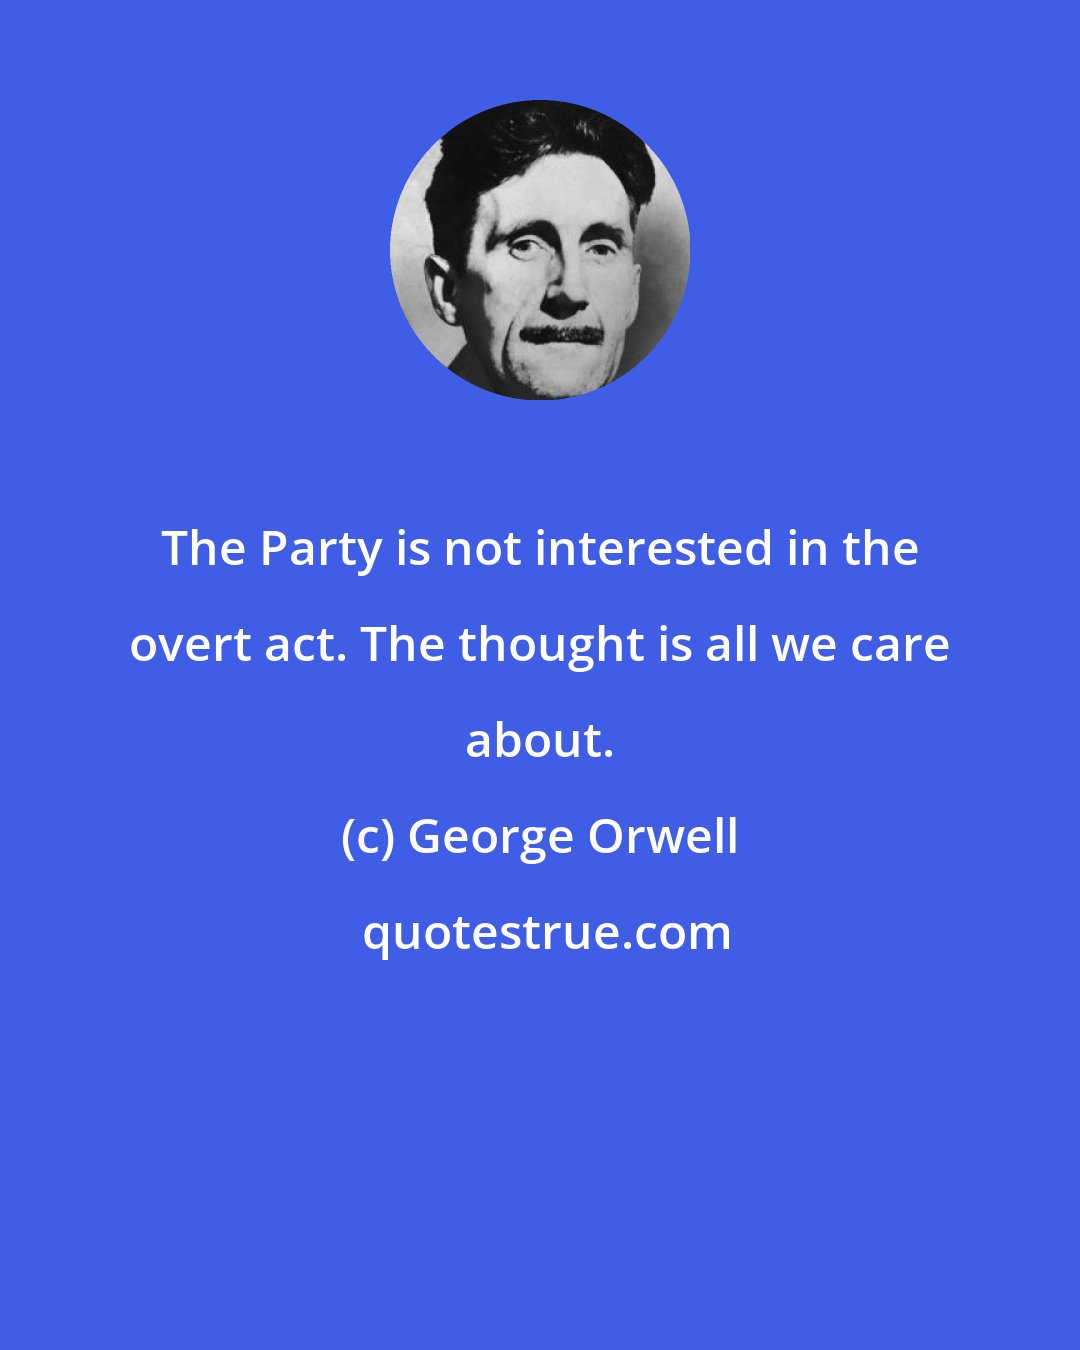 George Orwell: The Party is not interested in the overt act. The thought is all we care about.